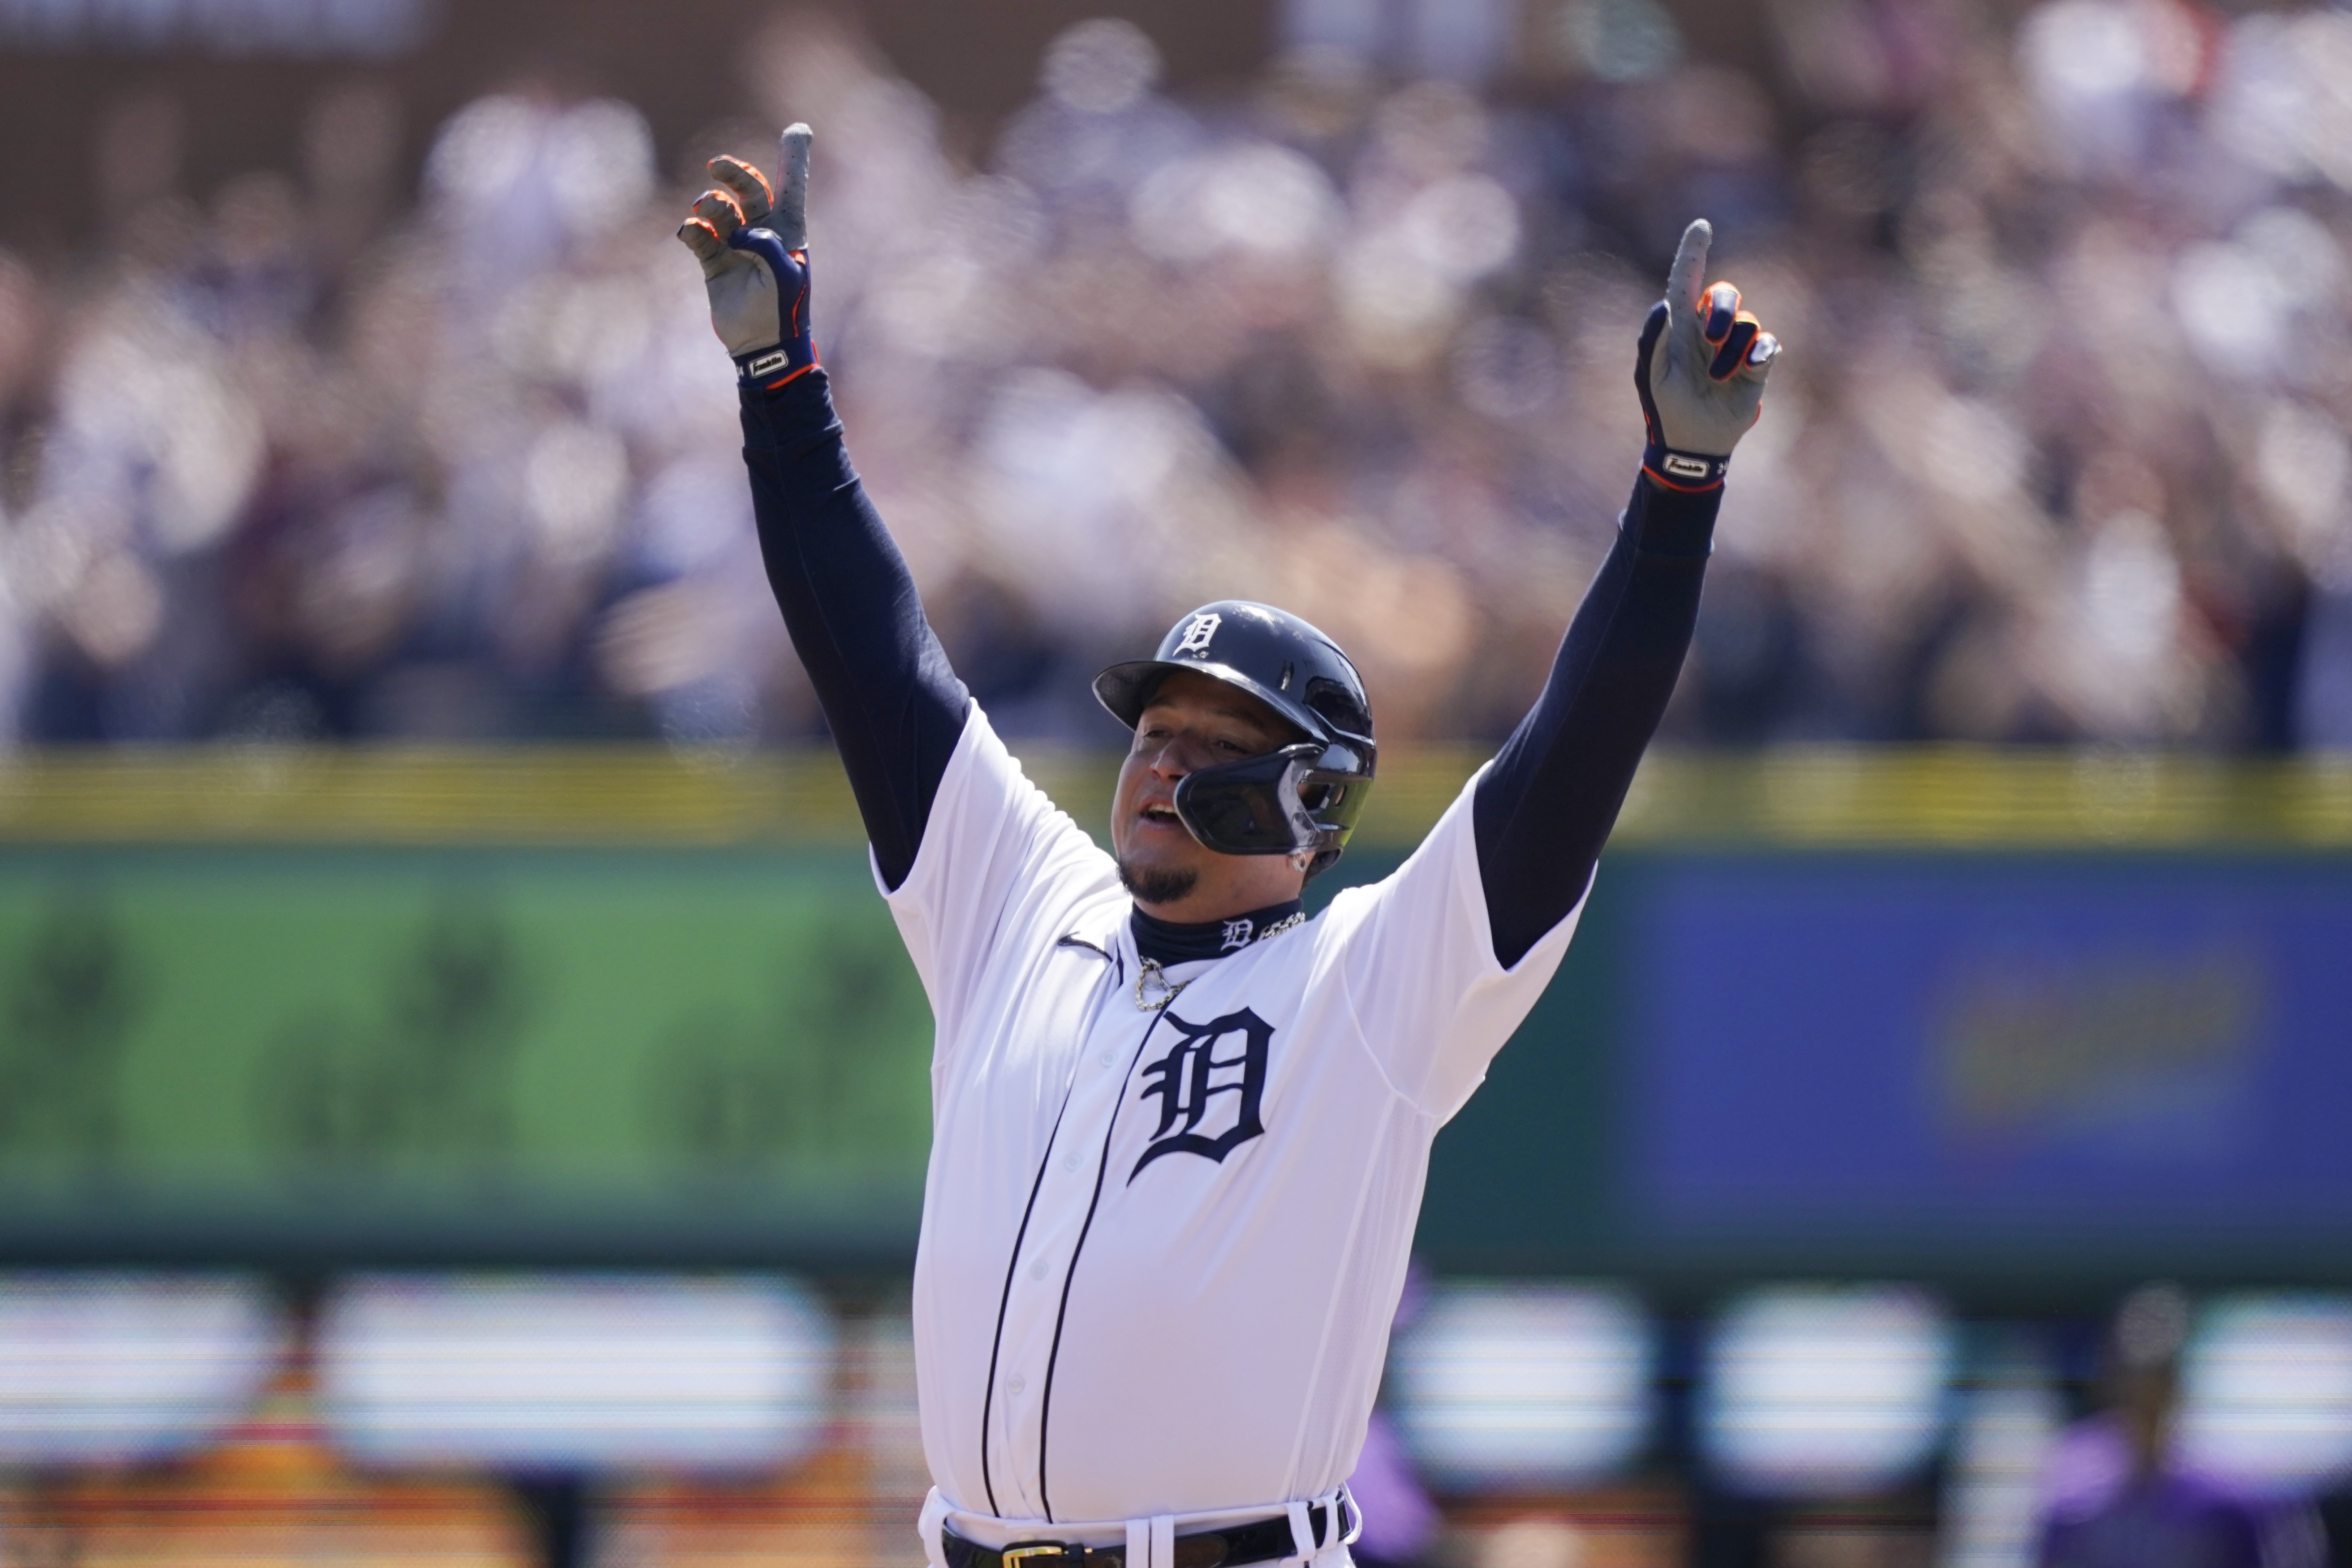 Congratulations pour in for Detroit Tigers' Miguel Cabrera after